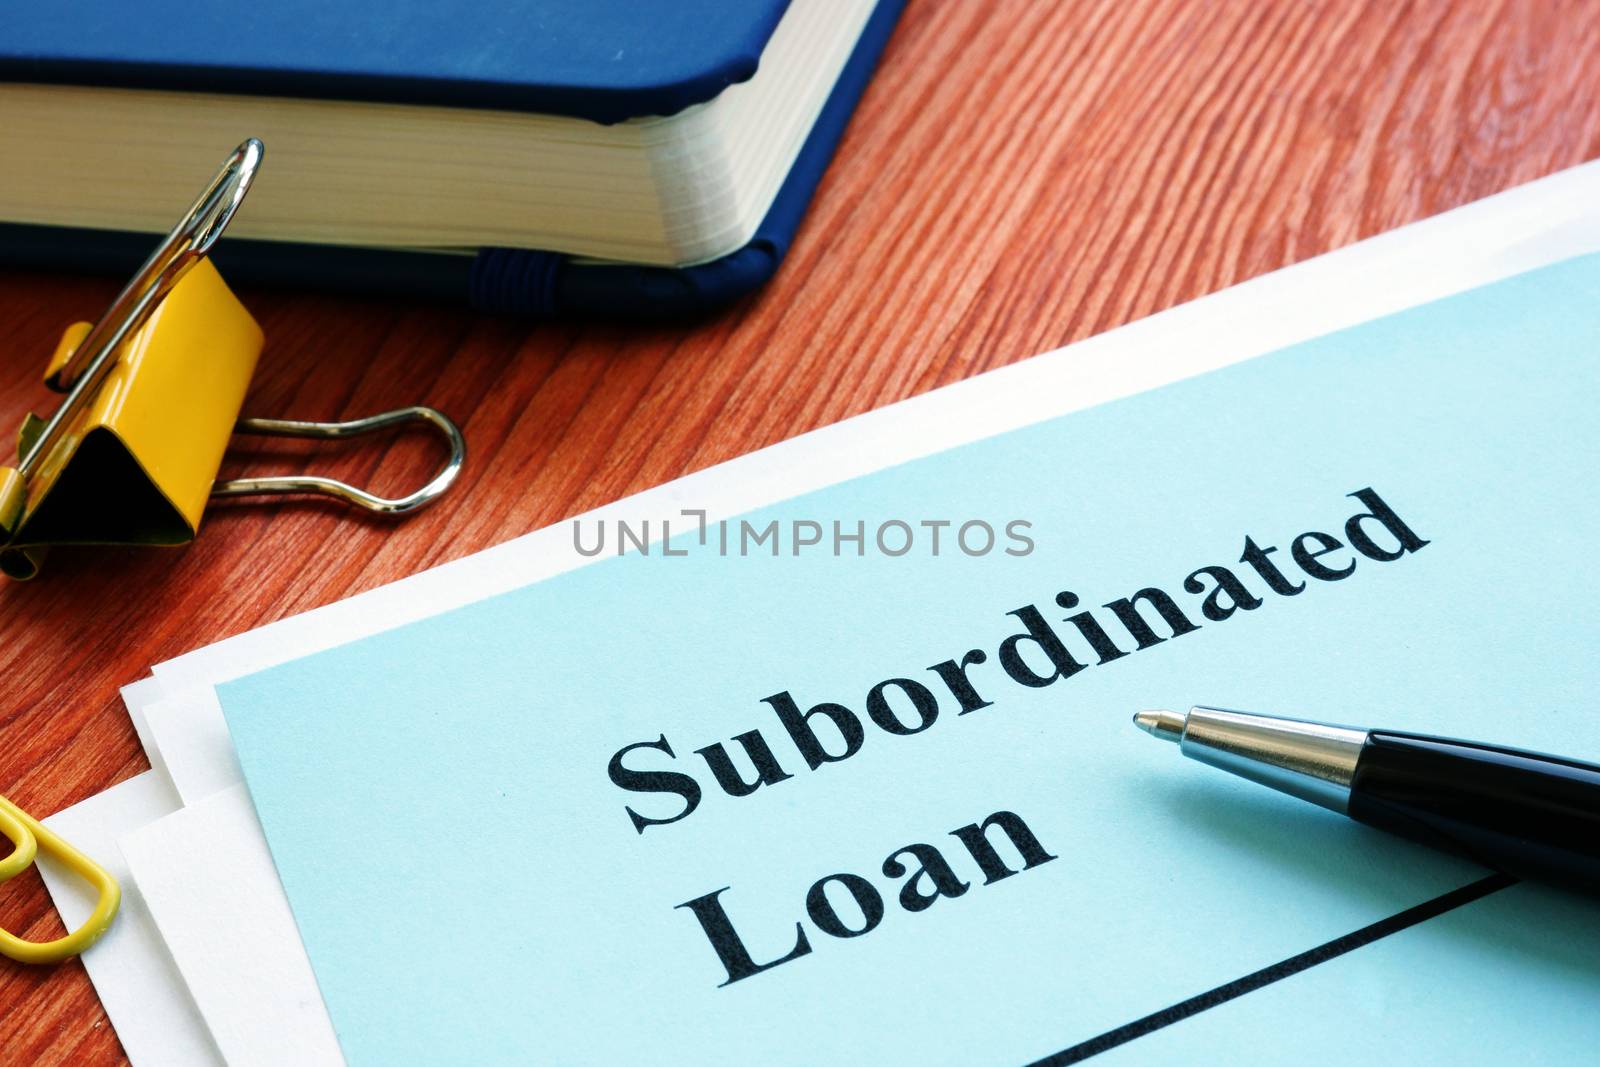 Subordinated loan debt agreement in the office. by designer491